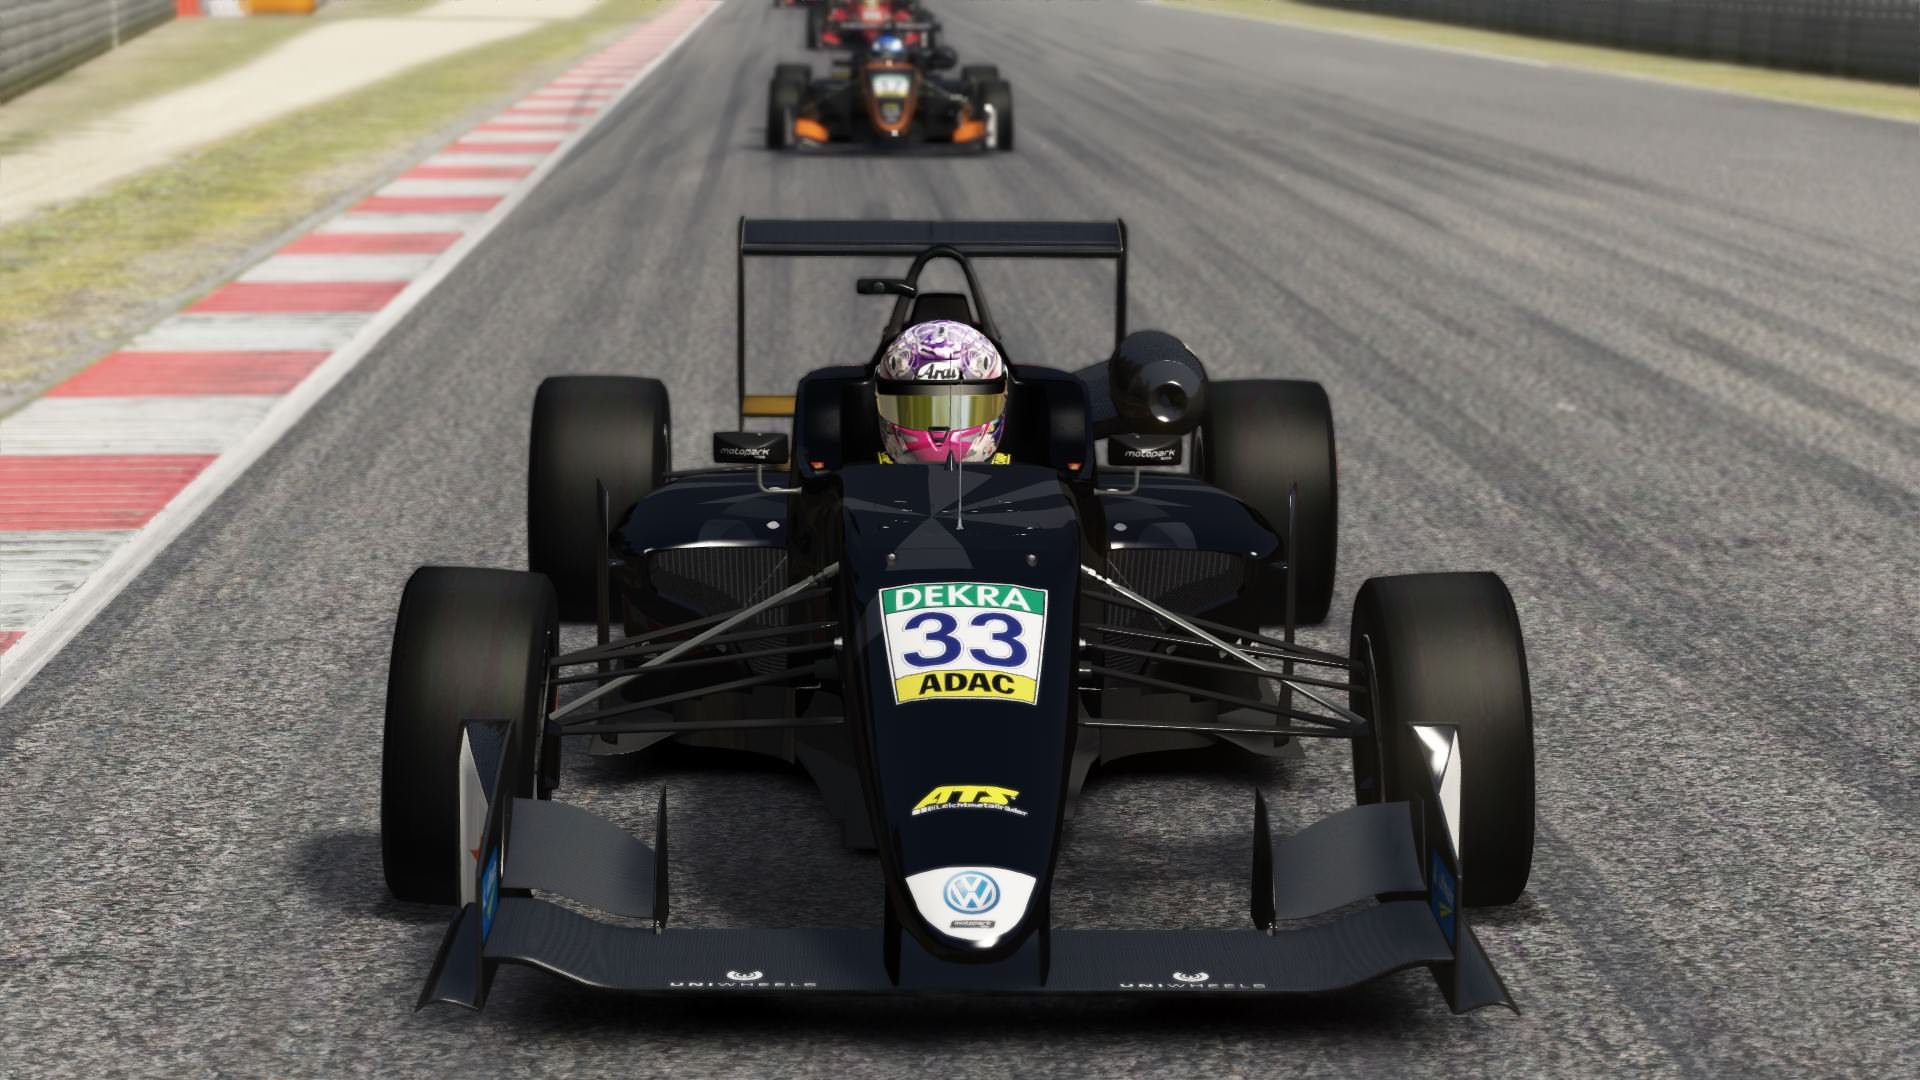 More information about "Assetto Corsa: Formula 3 by RSR v4.0 disponibile"